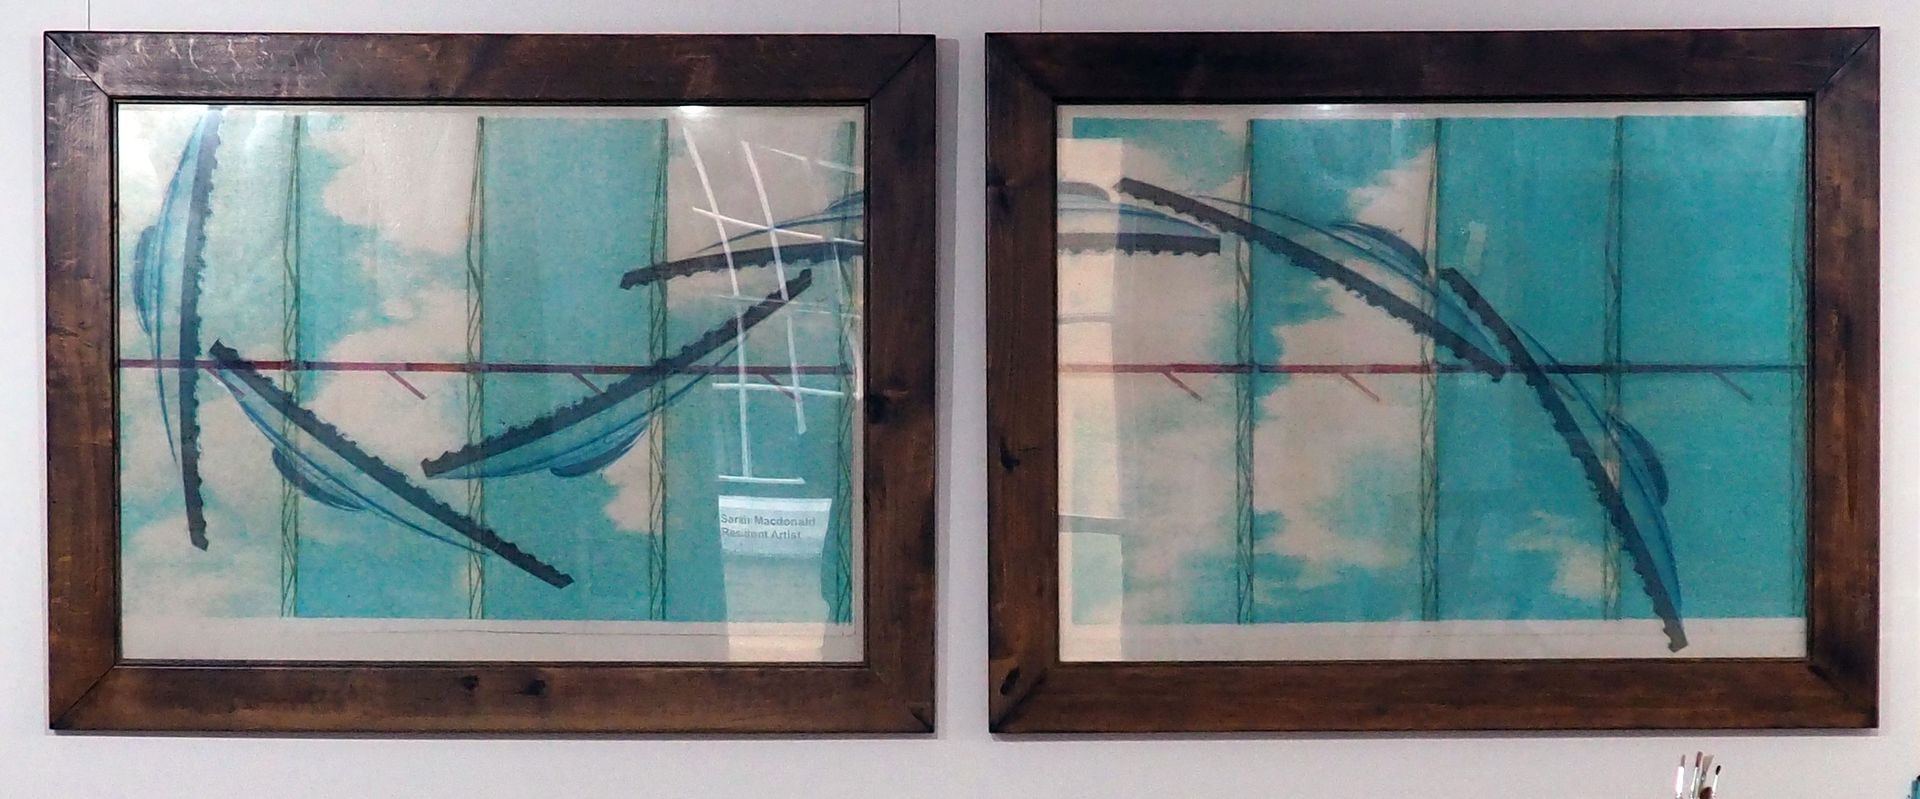 Photo taken of two large framed print-influenced pieces. The roof of the Roundhouse is repeated like a wave in dark blue, and flows from one frame into the other. There are signs of the elevated railway in red as well as the light blue sky as a backdrop.